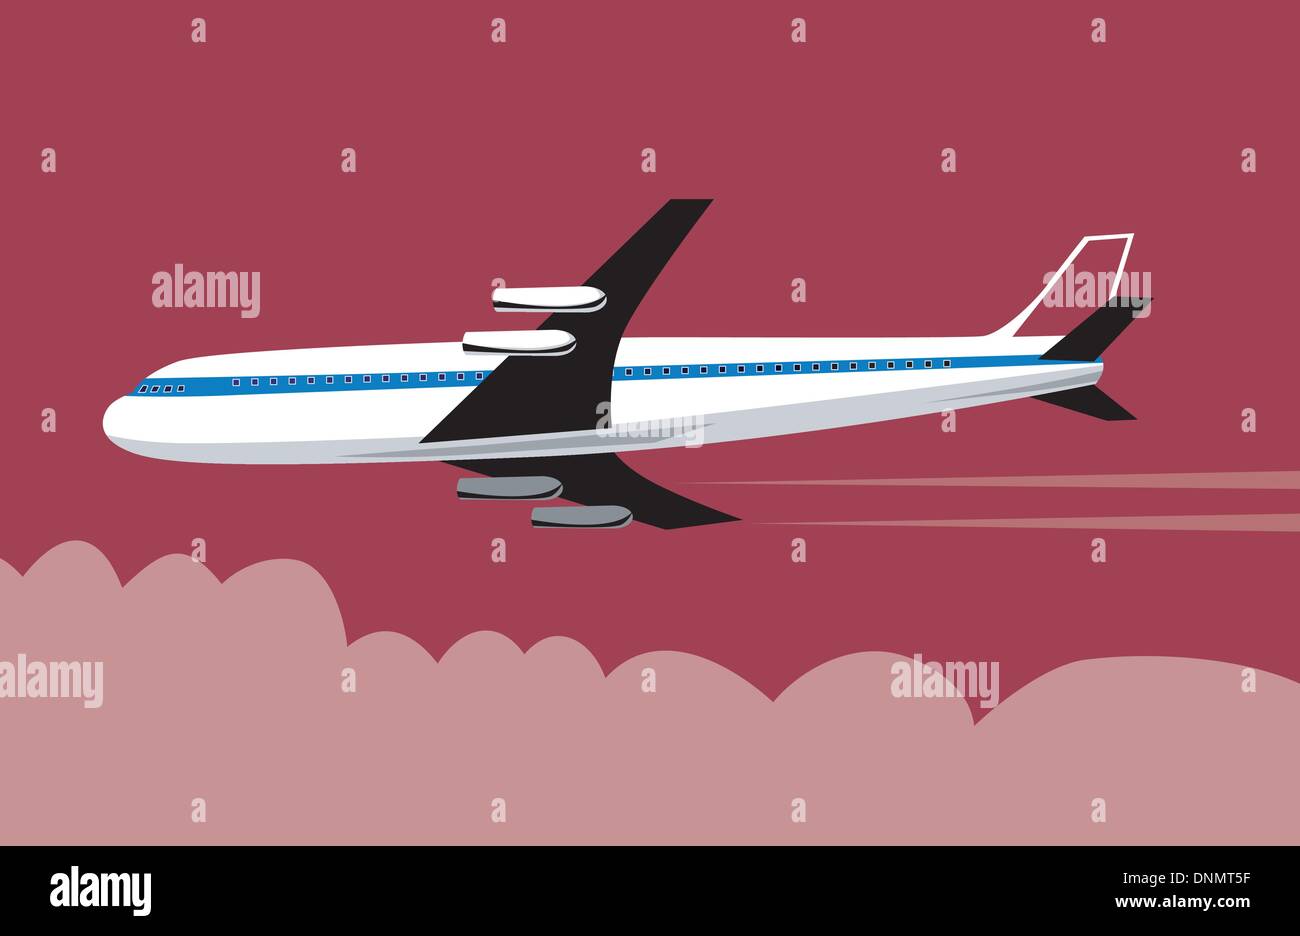 Illustration of a commercial jet plane airliner with clouds in background. Stock Vector